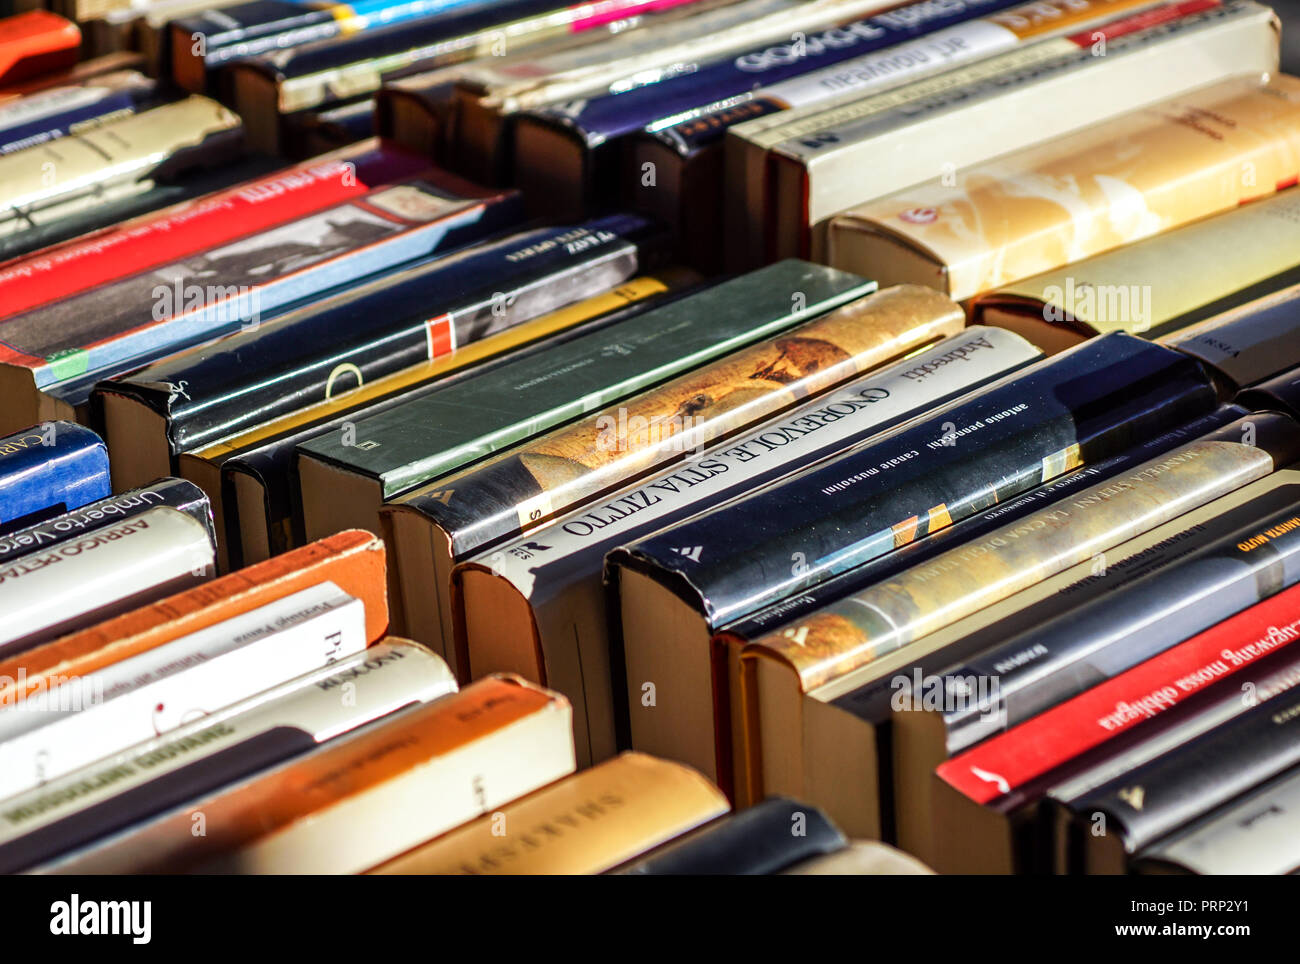 NAPLES, ITALY - MARCH 10 2017: Second hand book stalls of the book market in the historical center of Naples, Italy. Stock Photo